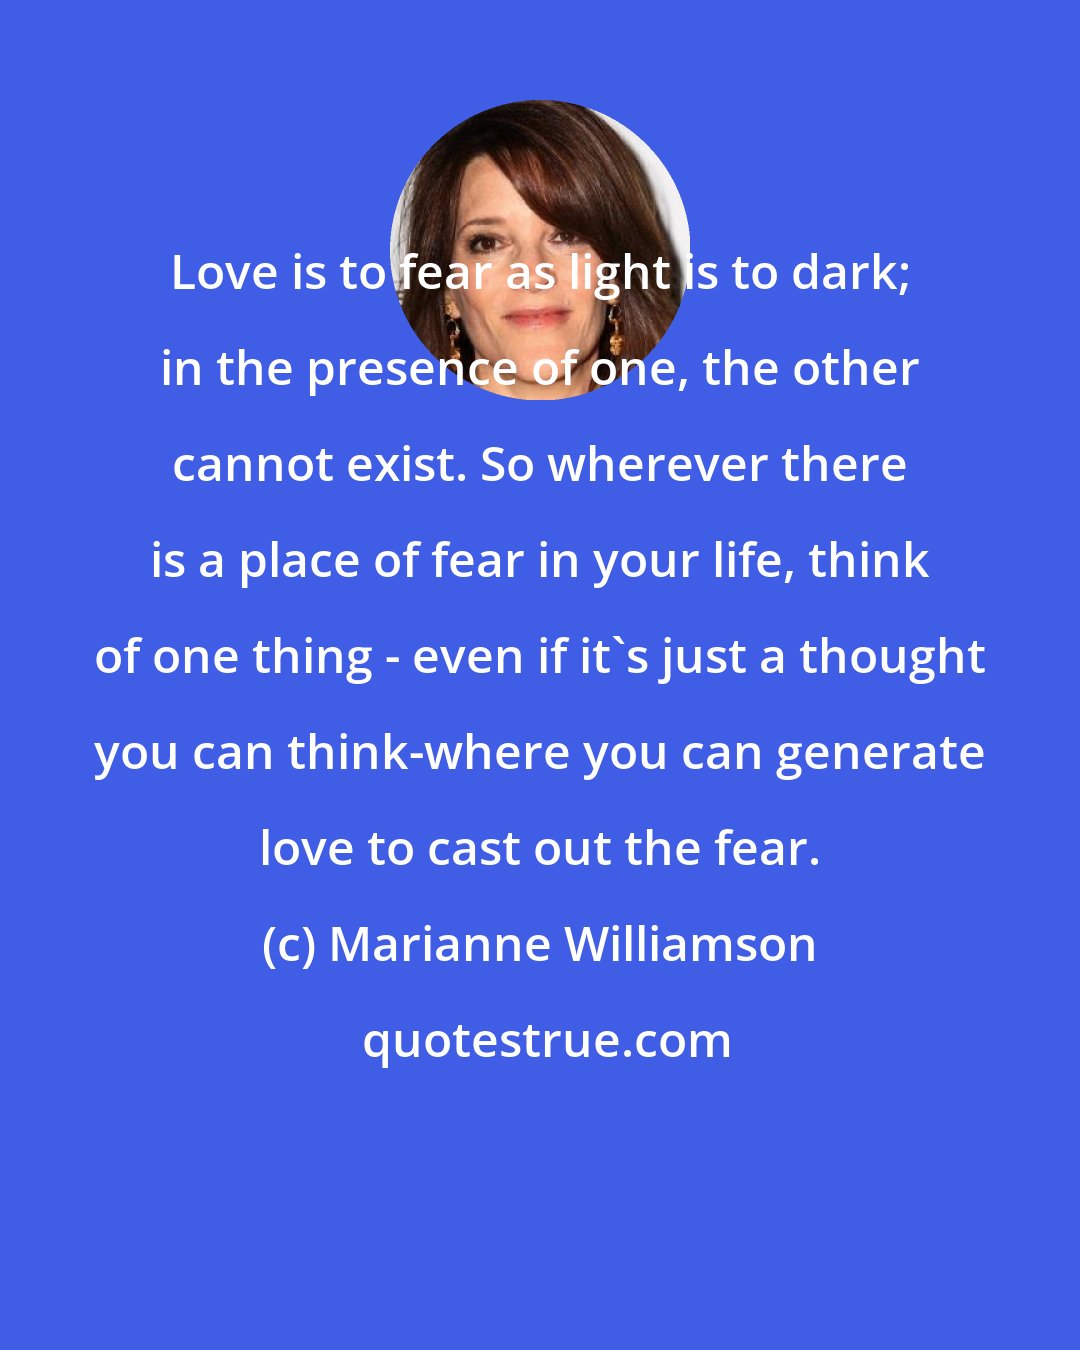 Marianne Williamson: Love is to fear as light is to dark; in the presence of one, the other cannot exist. So wherever there is a place of fear in your life, think of one thing - even if it's just a thought you can think-where you can generate love to cast out the fear.